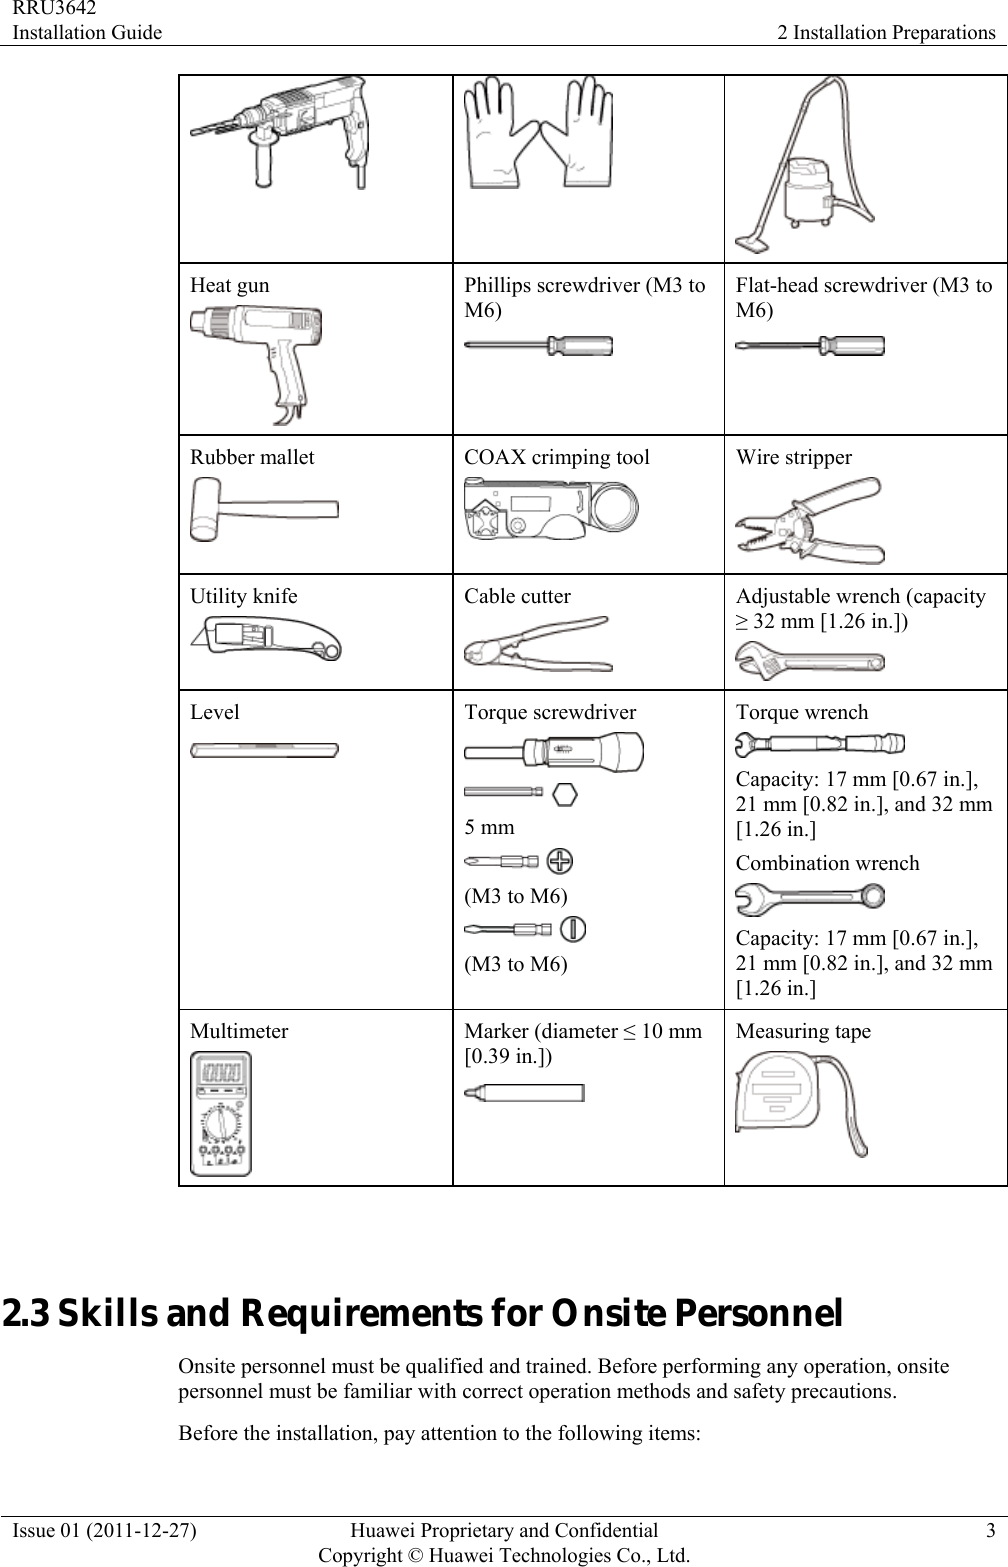 RRU3642 Installation Guide  2 Installation Preparations Issue 01 (2011-12-27)  Huawei Proprietary and Confidential         Copyright © Huawei Technologies Co., Ltd.3    Heat gun  Phillips screwdriver (M3 to M6)  Flat-head screwdriver (M3 to M6)  Rubber mallet  COAX crimping tool  Wire stripper  Utility knife  Cable cutter  Adjustable wrench (capacity ≥ 32 mm [1.26 in.])  Level  Torque screwdriver   5 mm  (M3 to M6)  (M3 to M6) Torque wrench  Capacity: 17 mm [0.67 in.], 21 mm [0.82 in.], and 32 mm [1.26 in.] Combination wrench  Capacity: 17 mm [0.67 in.], 21 mm [0.82 in.], and 32 mm [1.26 in.] Multimeter  Marker (diameter ≤ 10 mm [0.39 in.])  Measuring tape   2.3 Skills and Requirements for Onsite Personnel Onsite personnel must be qualified and trained. Before performing any operation, onsite personnel must be familiar with correct operation methods and safety precautions. Before the installation, pay attention to the following items: 